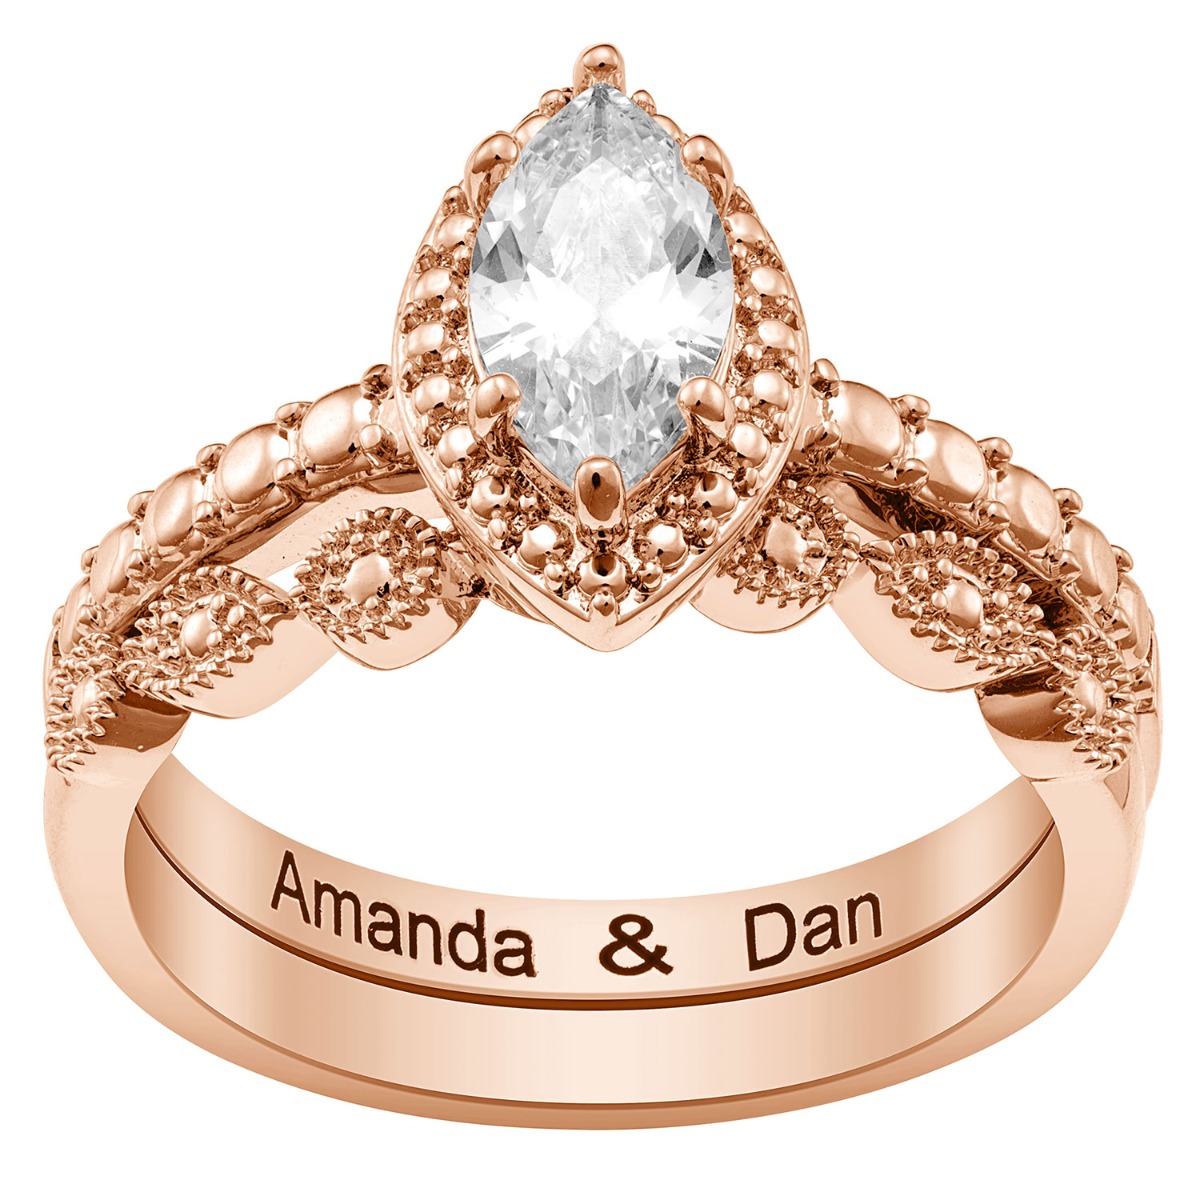 14K Rose Gold Plated Marquise Stone 2 Piece Wedding Ring Set